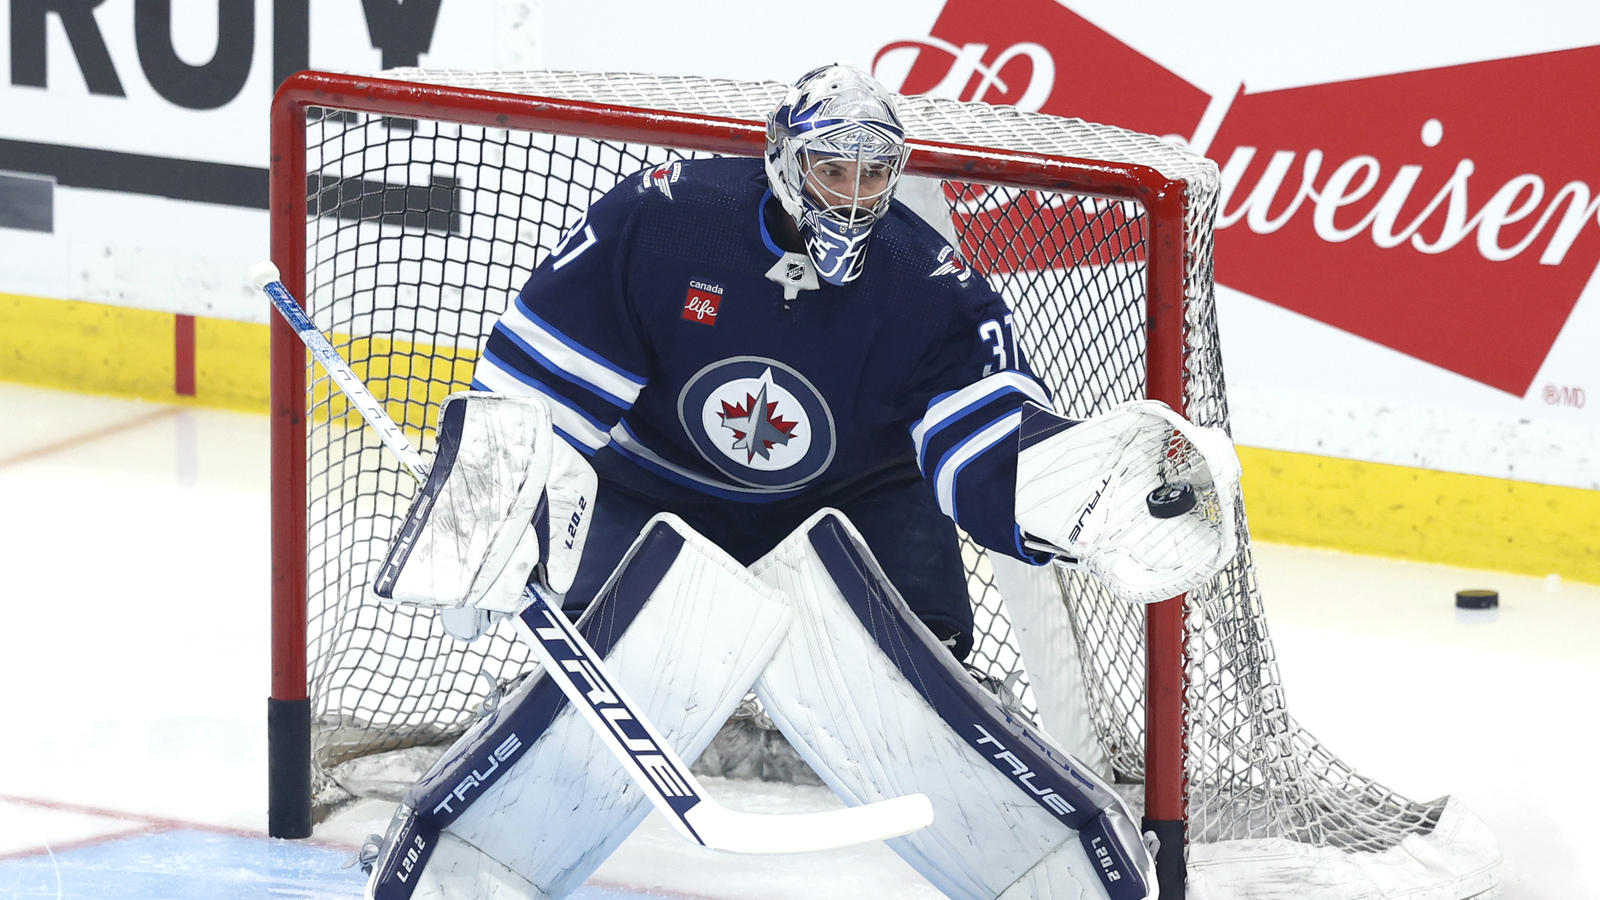 Jets’ Hellebuyck and Scheifele Leave Door Open to Re-Signing